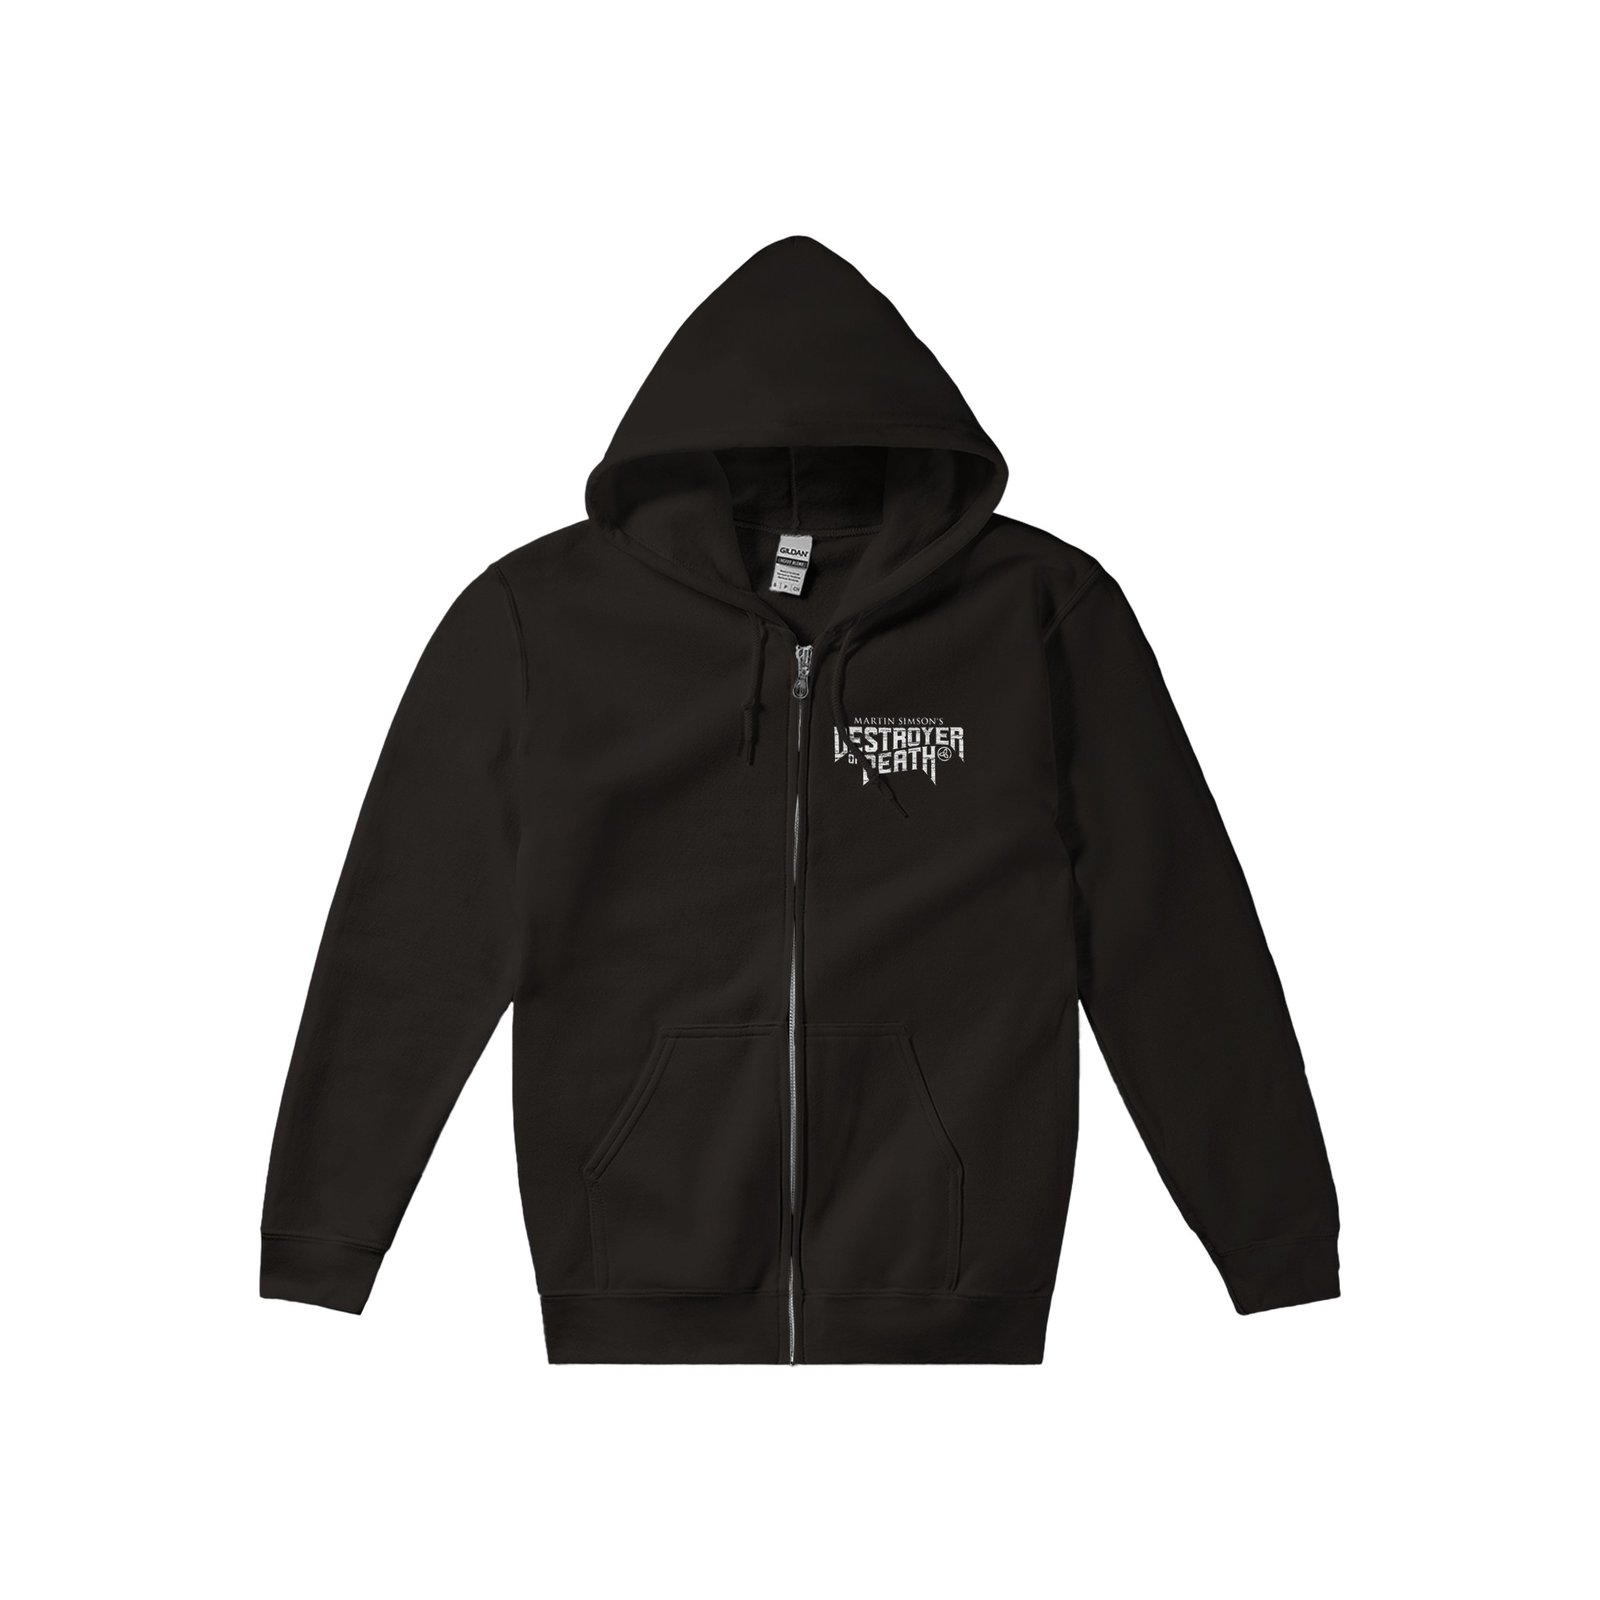 Martin Simson’s Destroyer of Death – Master of All Zip Hoodie